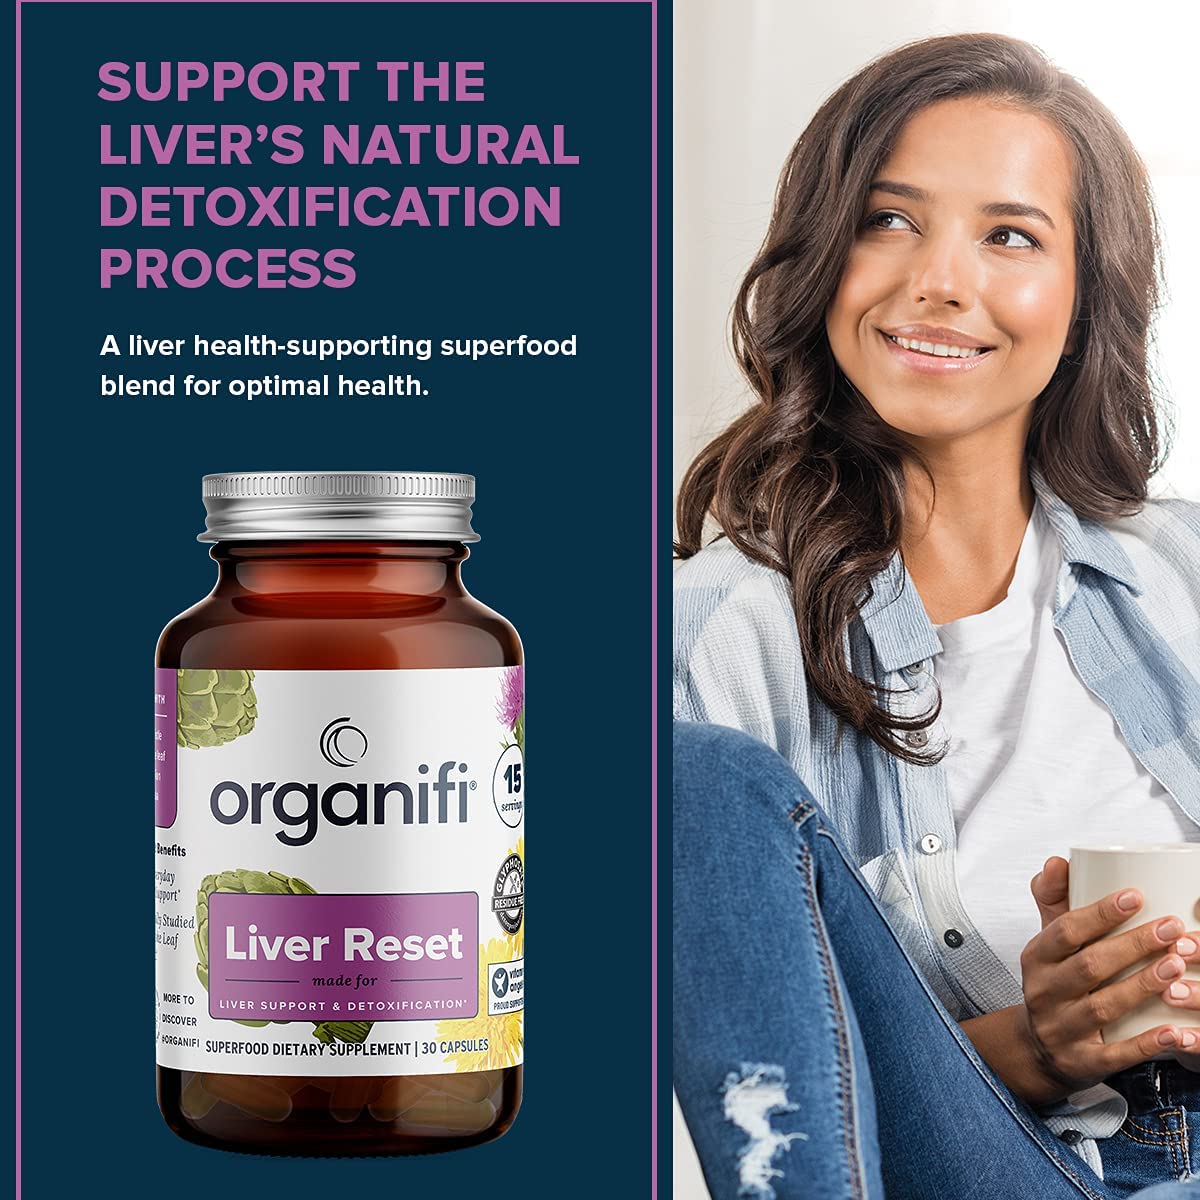 a woman smiling with an etiquette to Organifi Liver Reset